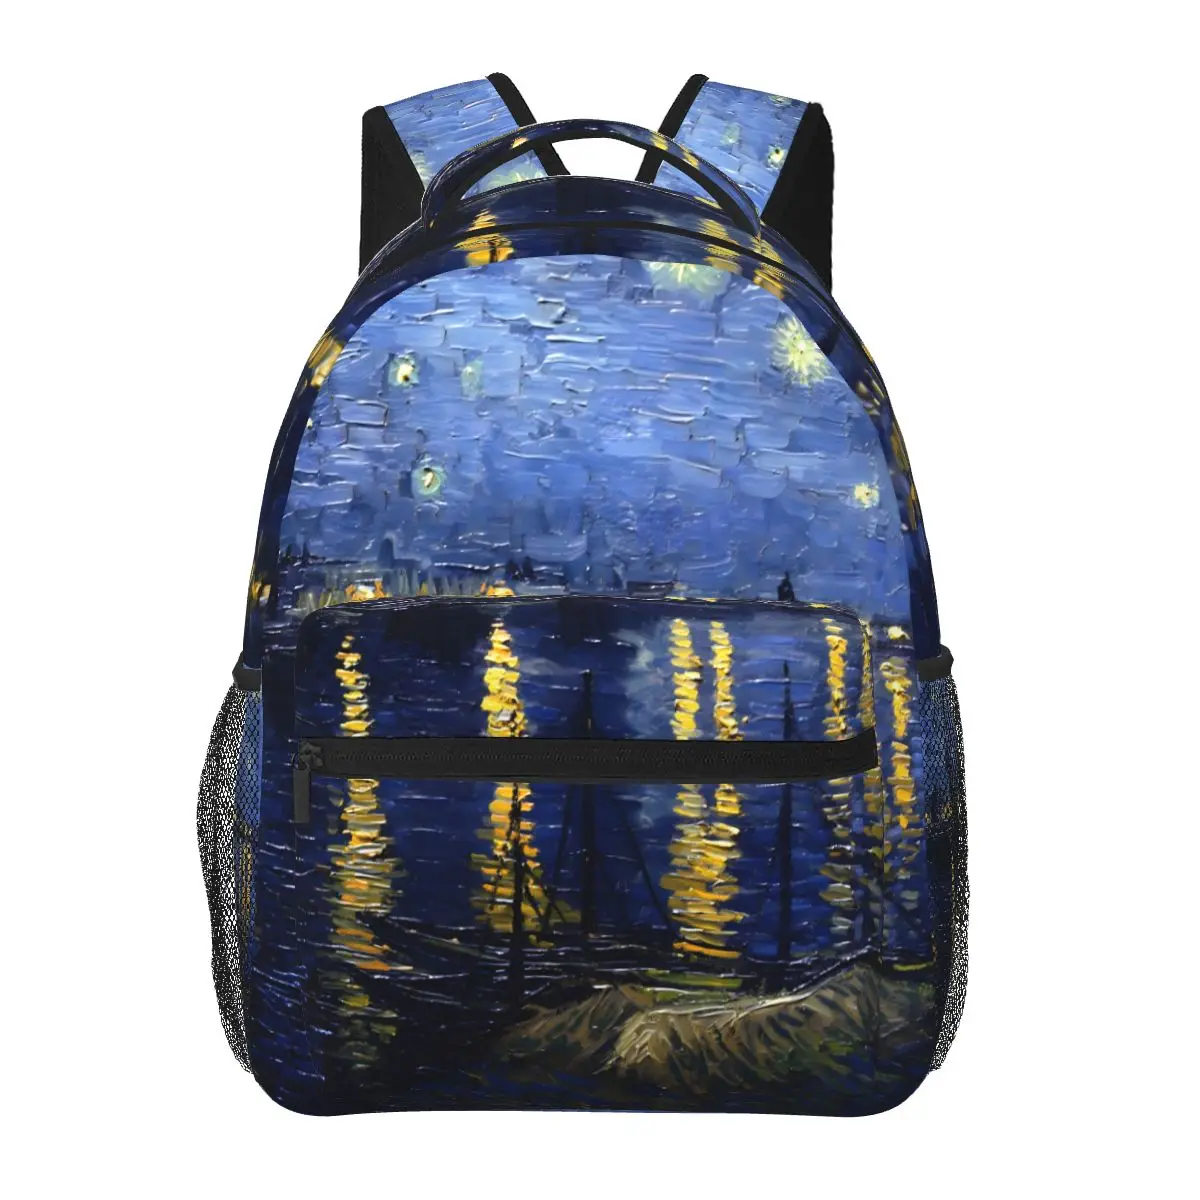 

Vincent Van Gogh Backpack Teen Starry Night Pattern Backpacks Polyester Casual School Bags Cycling Colorful Rucksack